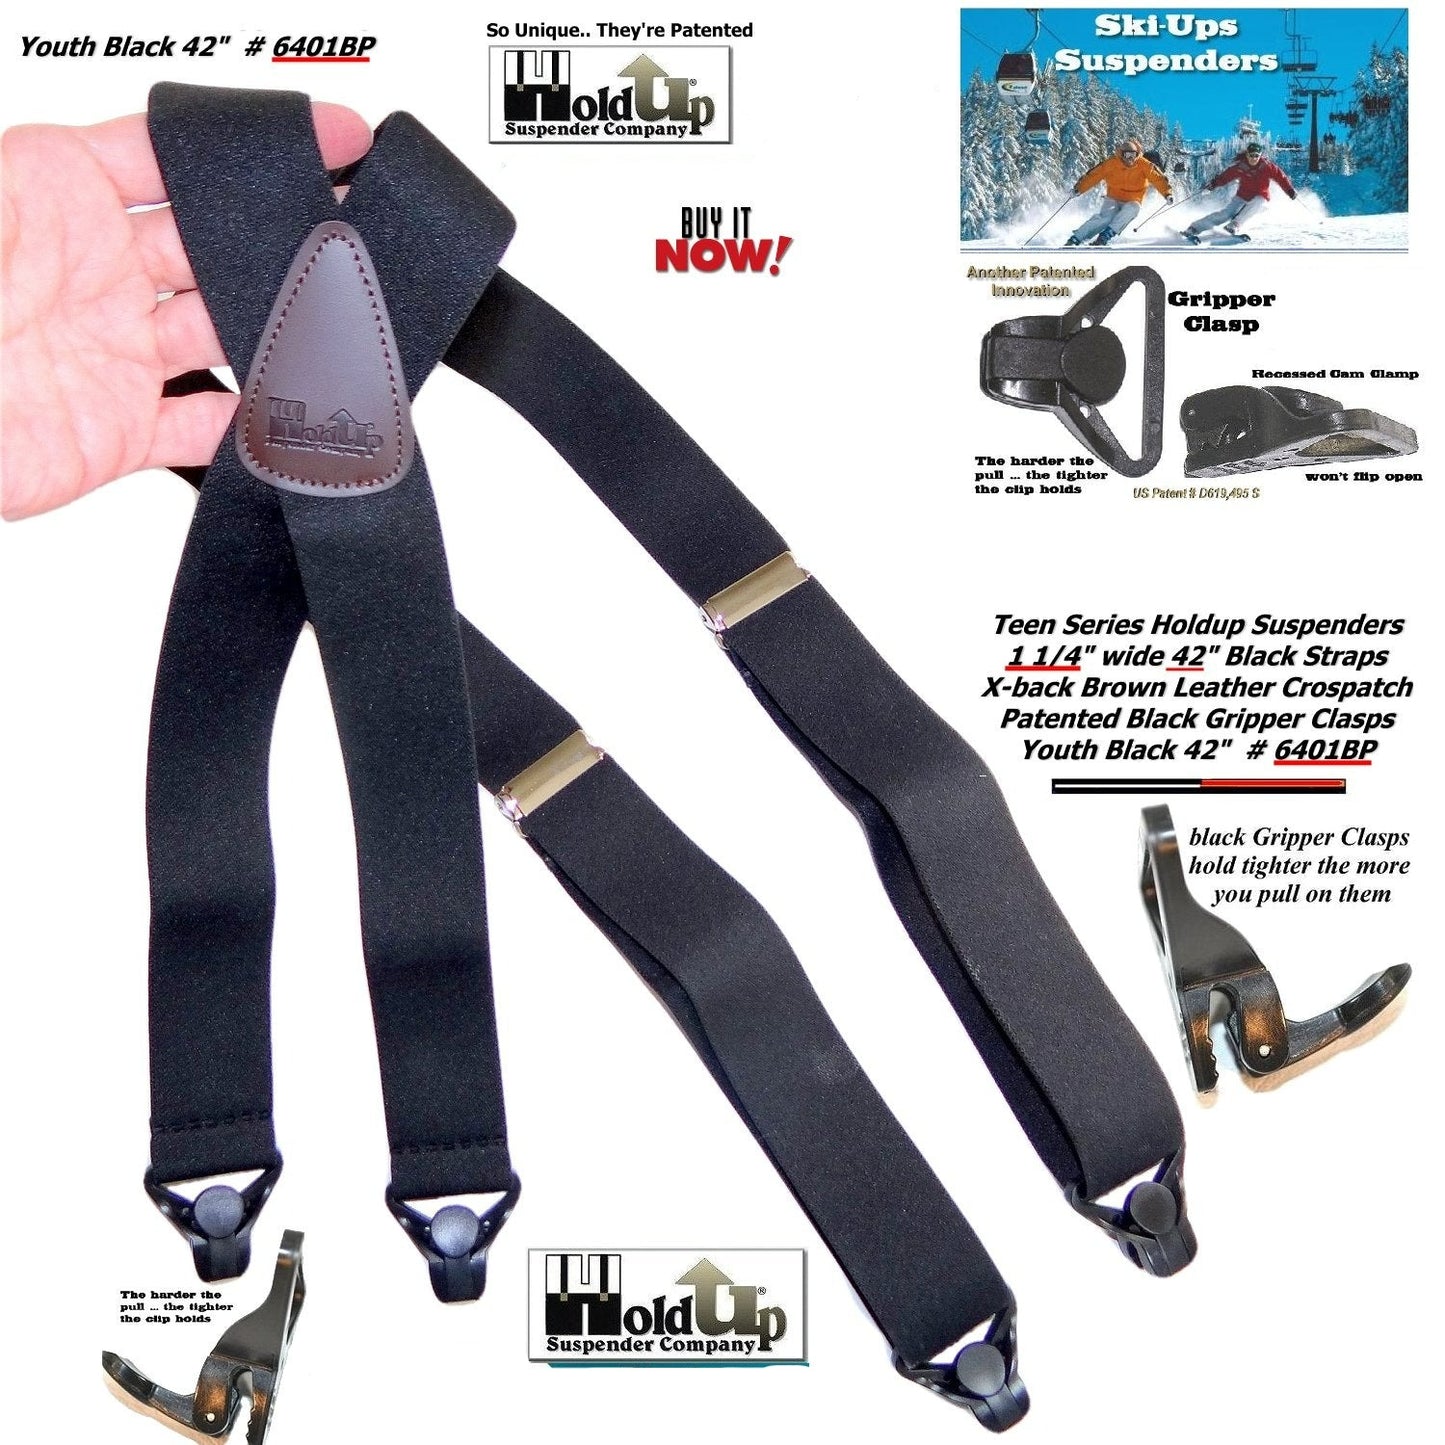 Holdup Black 42" Teen size Black Ski-Ups X-back Suspenders with USA Patented Gripper Clasps